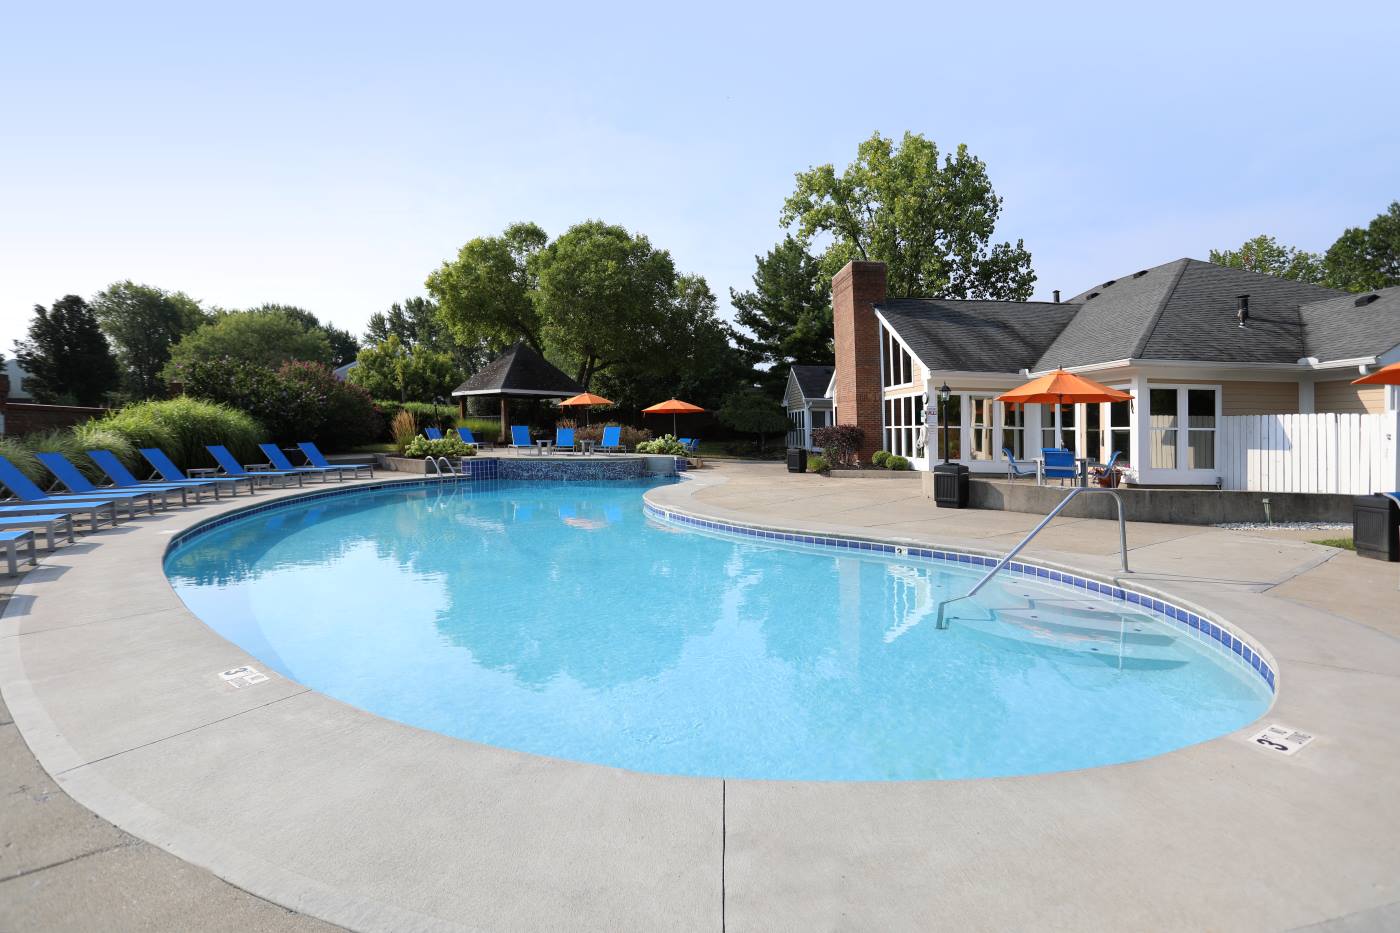 Fox Chase North's outdoor pool deck and communal seating area.